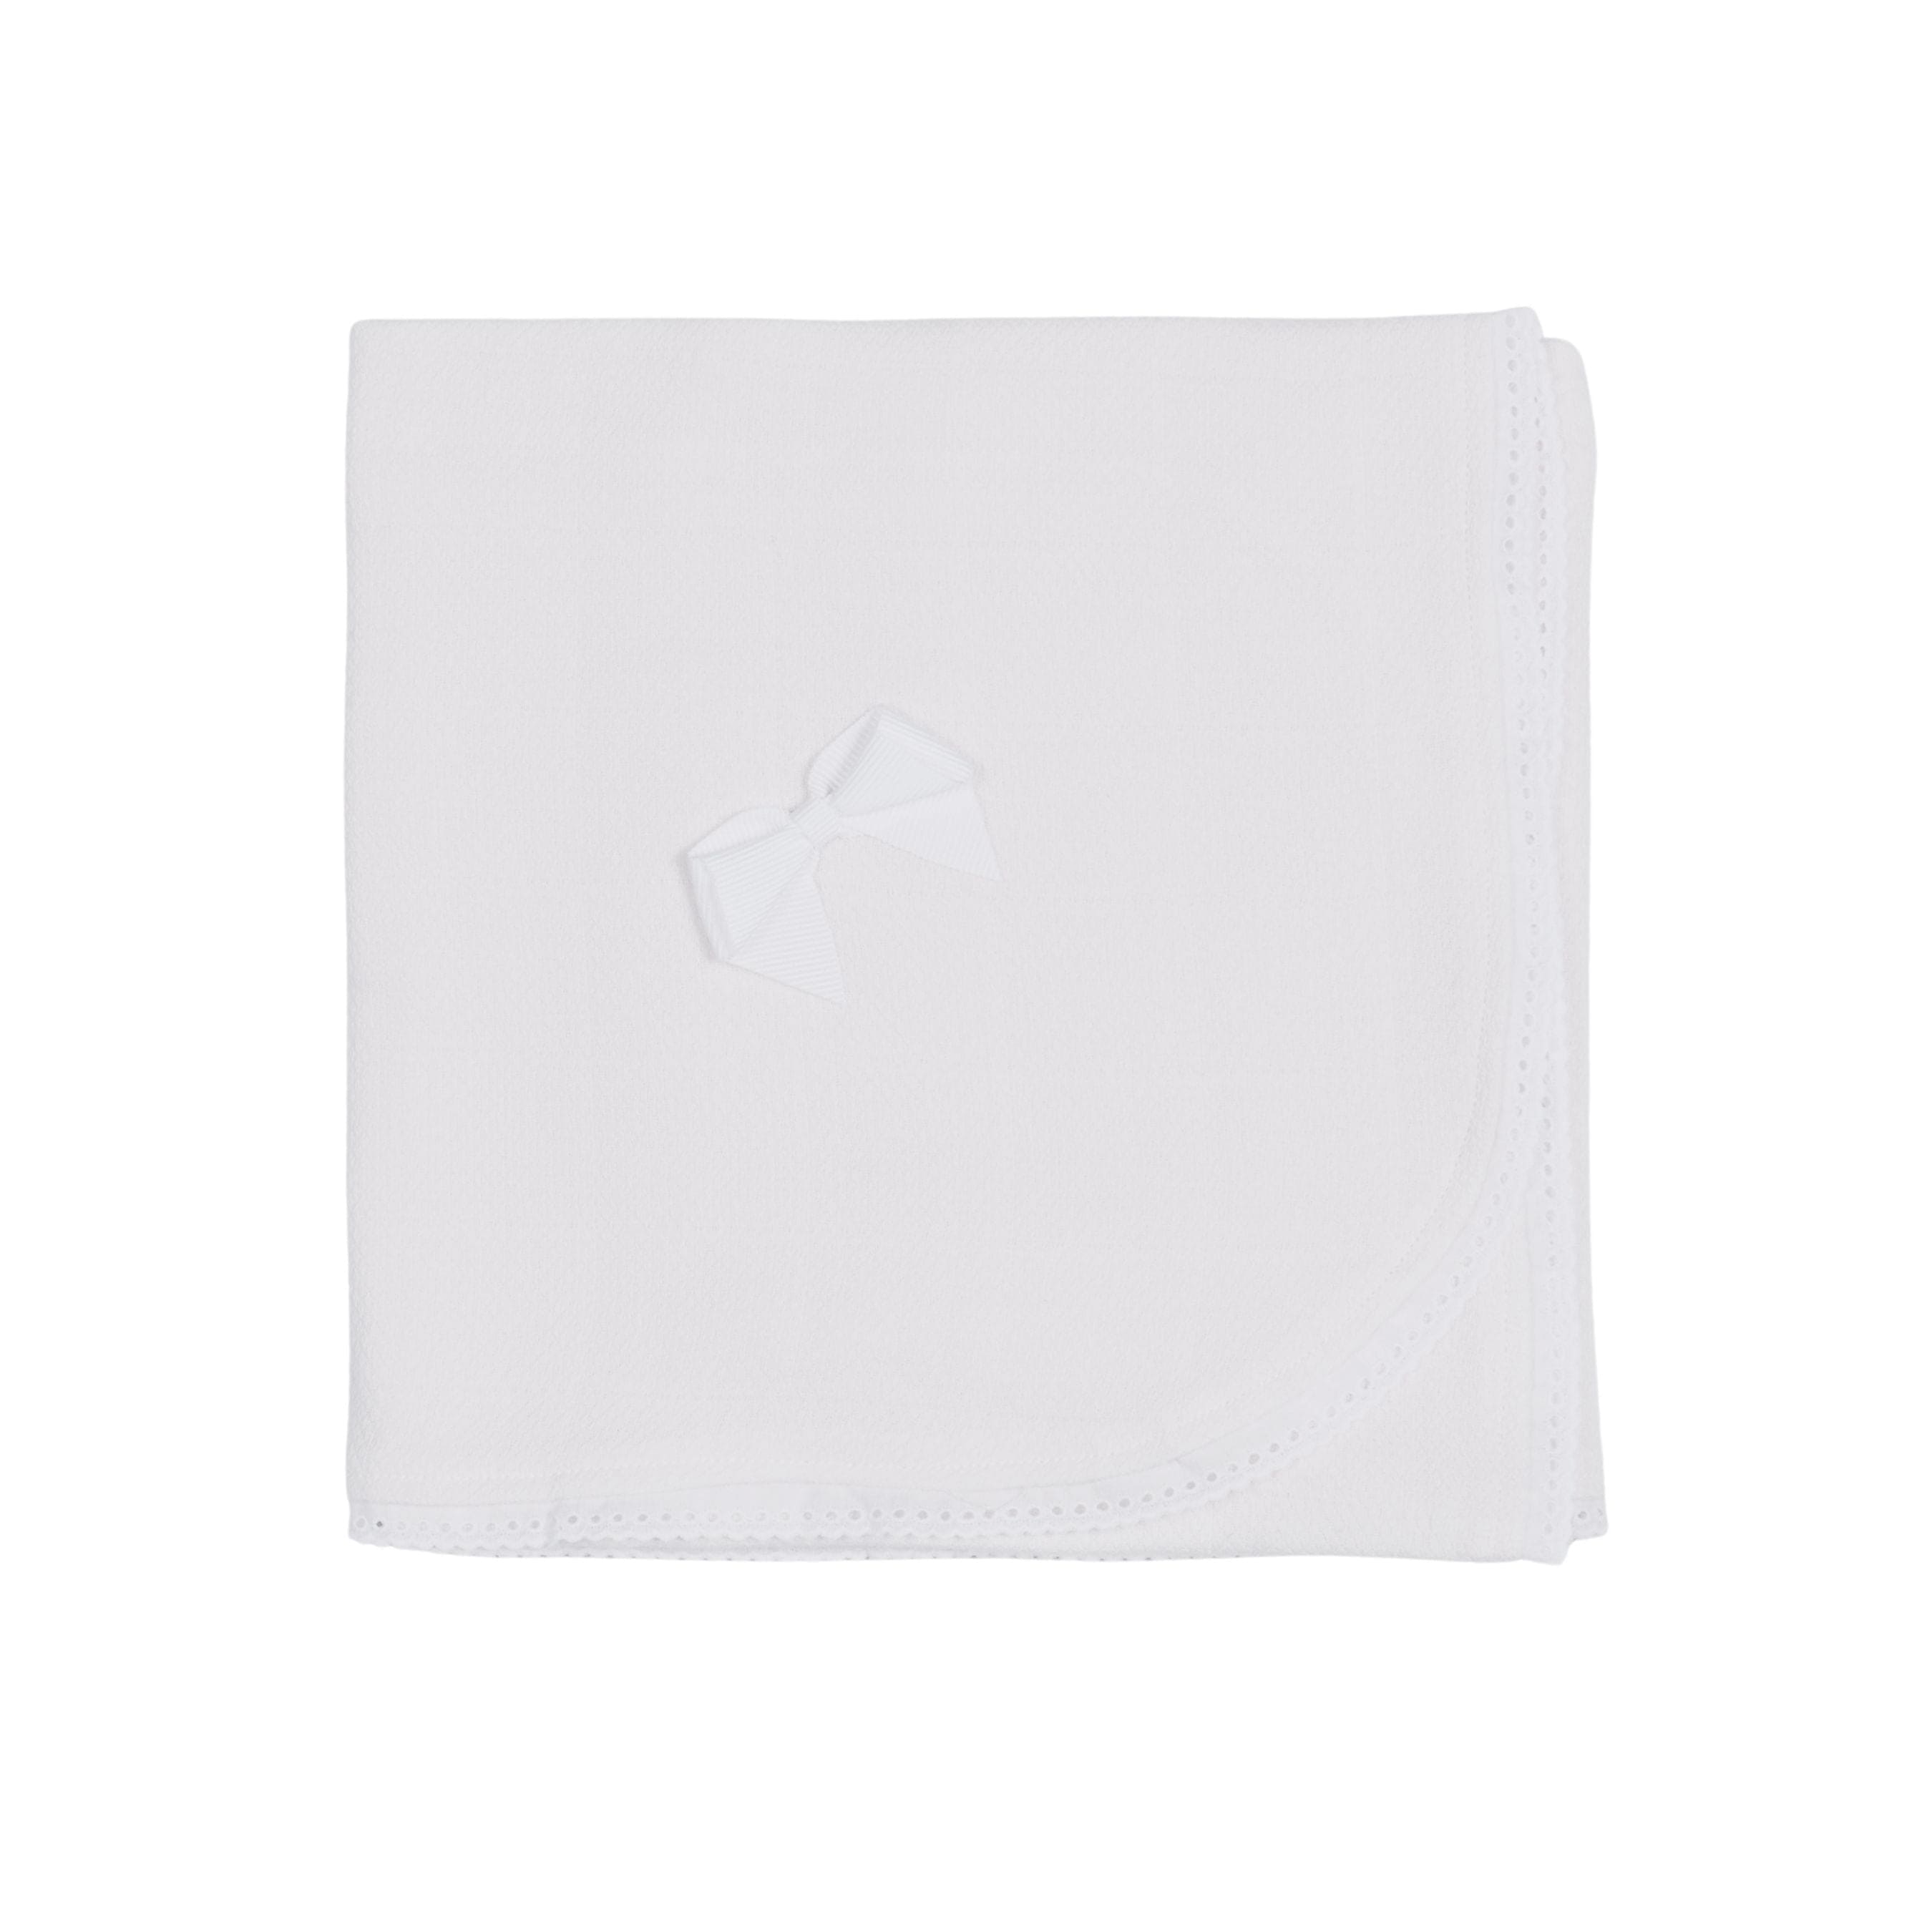 Chely | Girls White Cotton Muslin Square